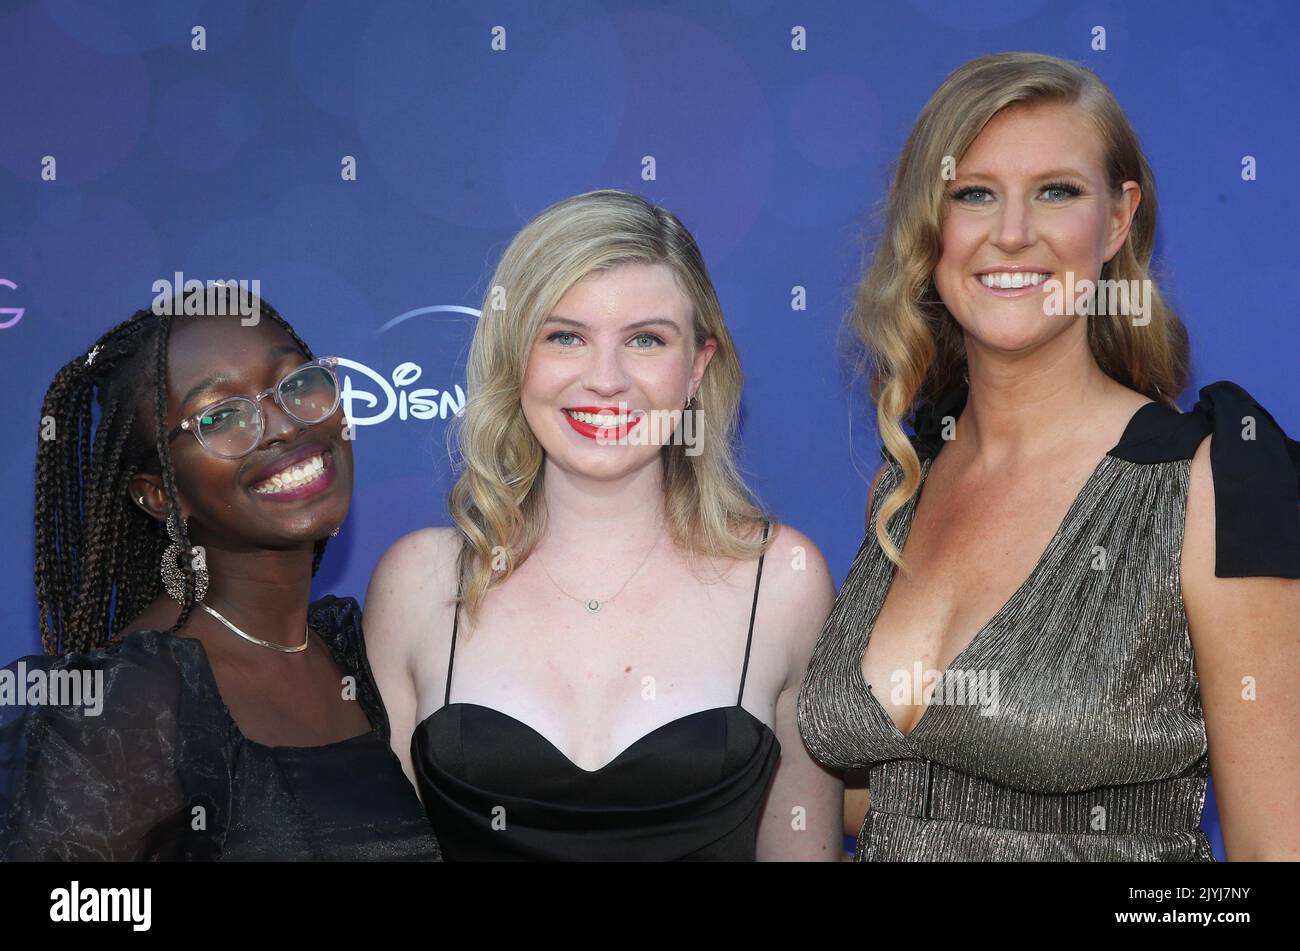 Los Angeles, Ca. 7th Sep, 2022. Sofia Ongele, Alex Crotty, Nicole Galovski at the Disney   LA Premiere of Growing Up at NeuHouse in Los Angeles, California on September 7, 2022. Credit: Faye Sadou/Media Punch/Alamy Live News Stock Photo